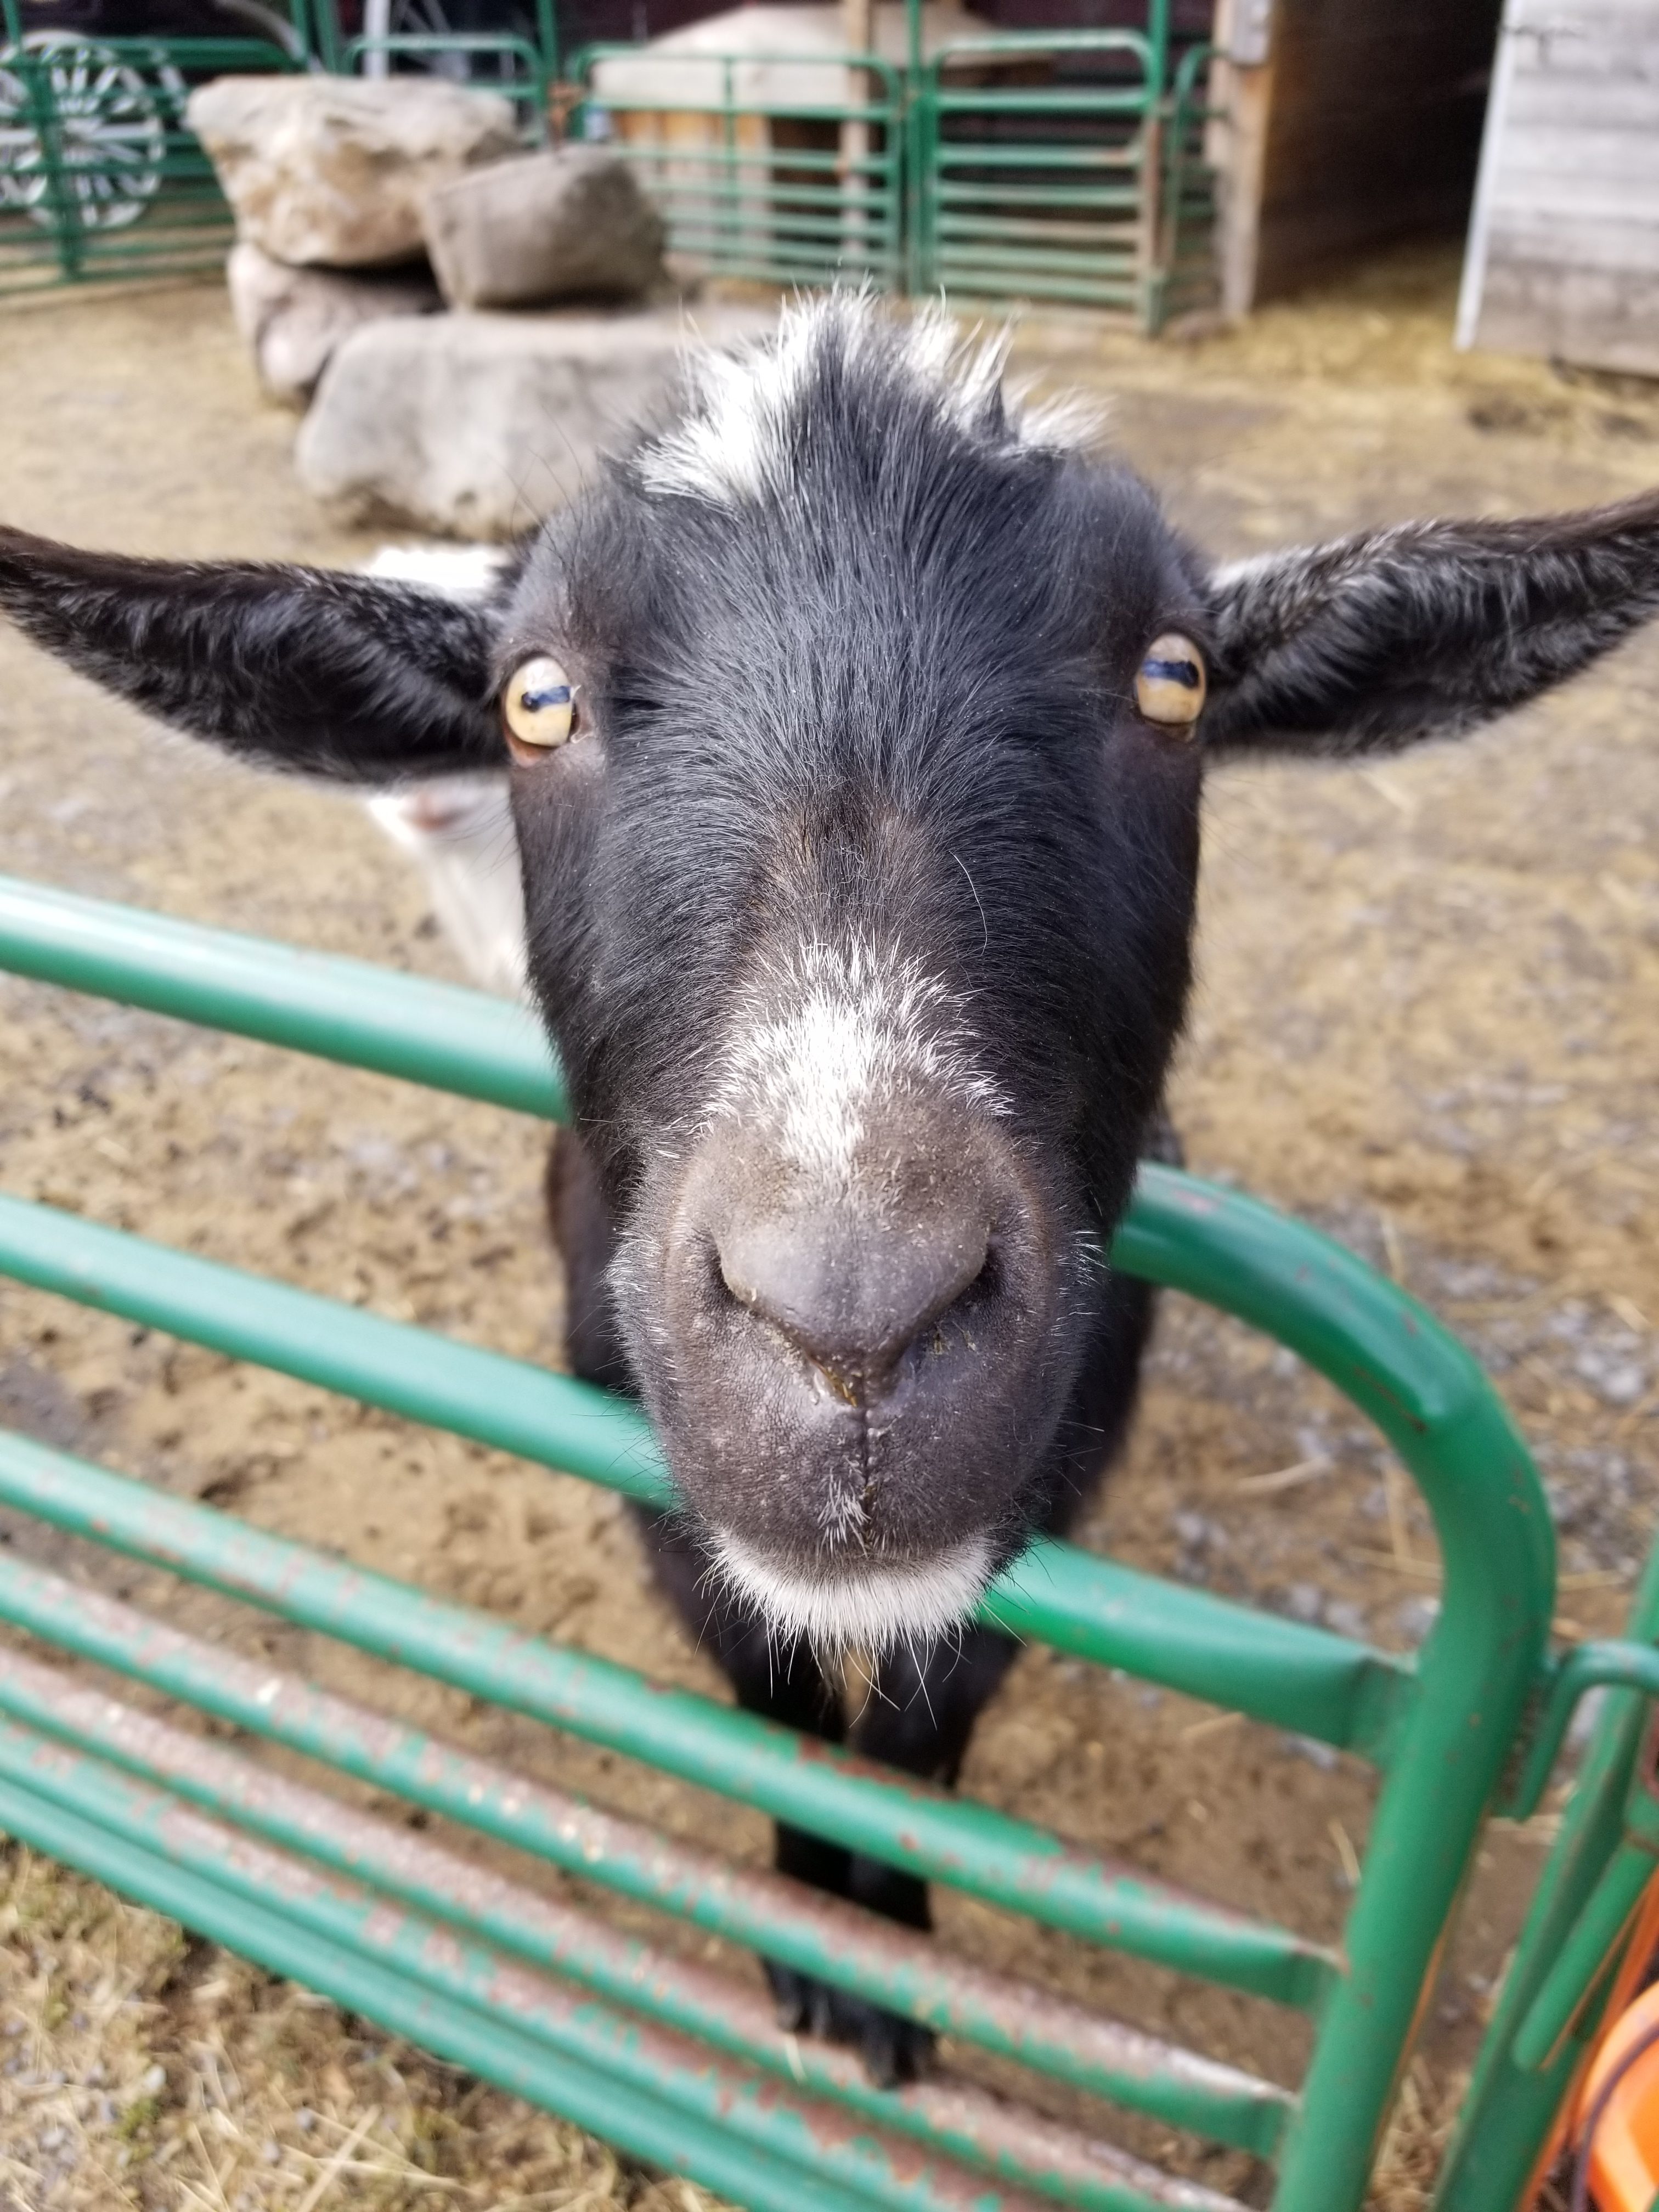 A black and white goat's face.